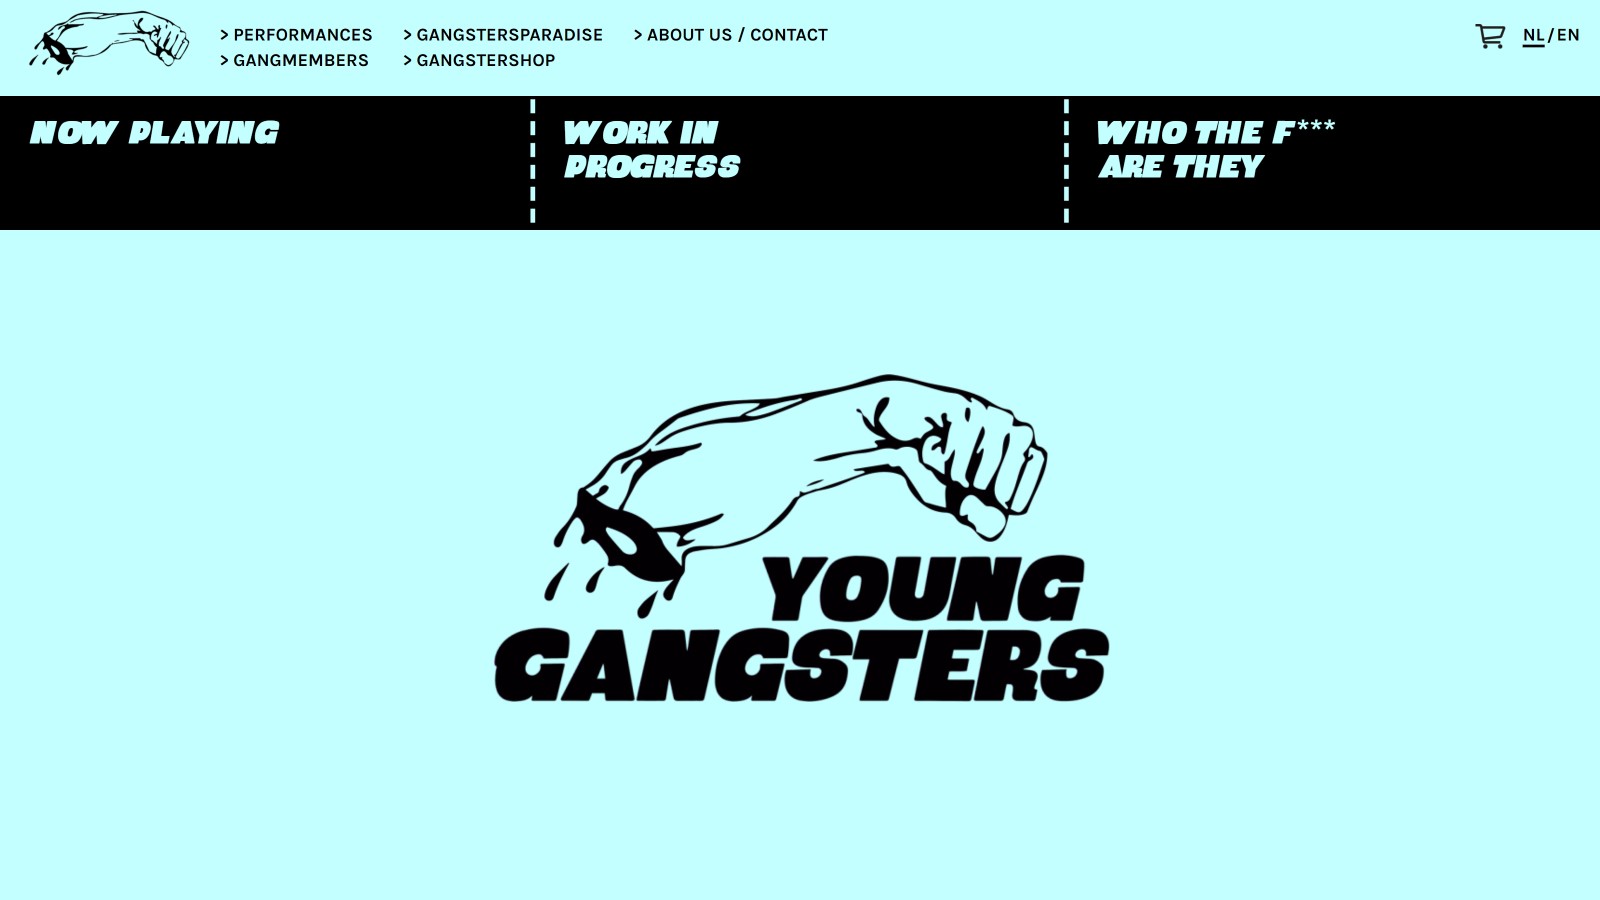 (c) Younggangsters.com